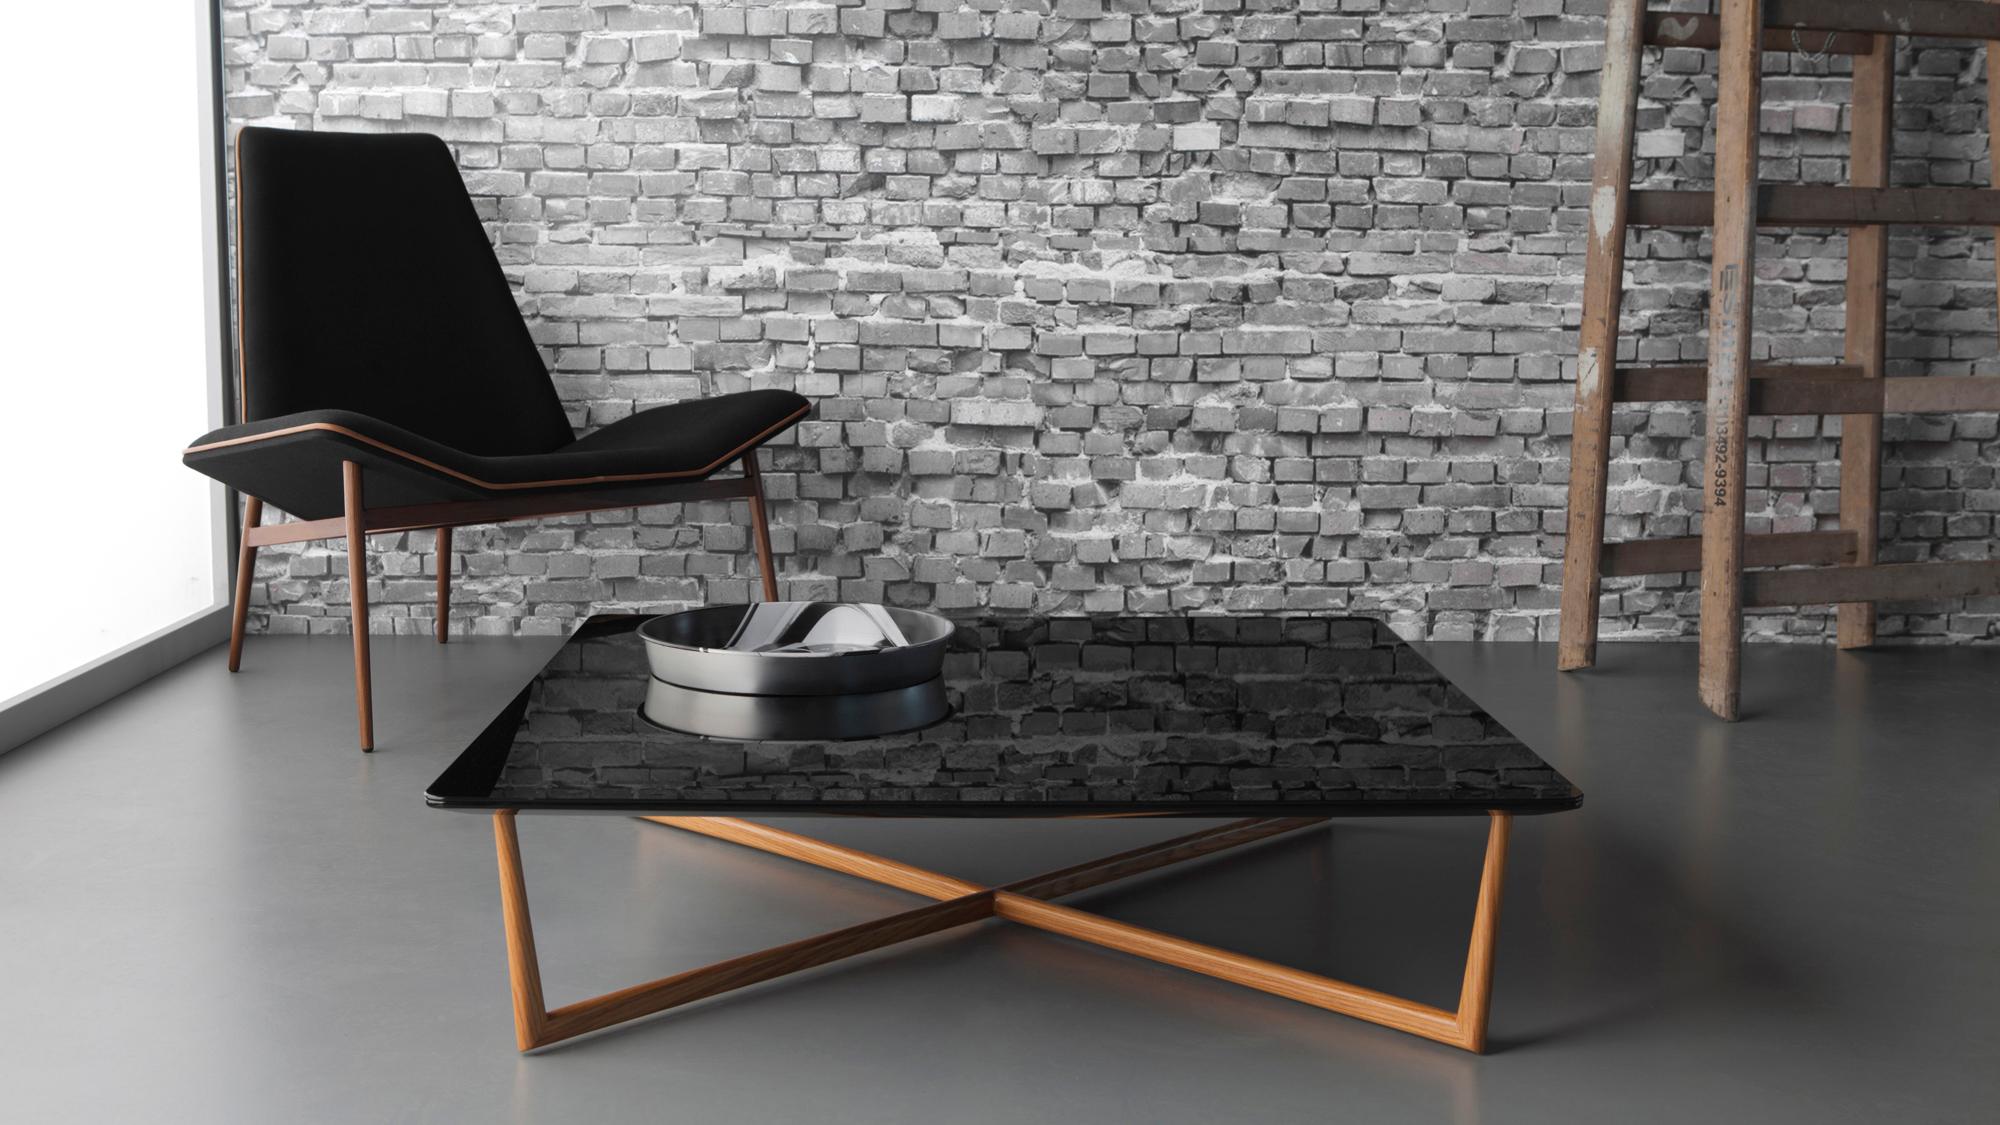 Flat Coffee Table by Doimo Brasil
Dimensions:  W 80 x D 80 x H 25 cm 
Materials: Base: Veneer, Top: Clear glass 8mm. 


With the intention of providing good taste and personality, Doimo deciphers trends and follows the evolution of man and his